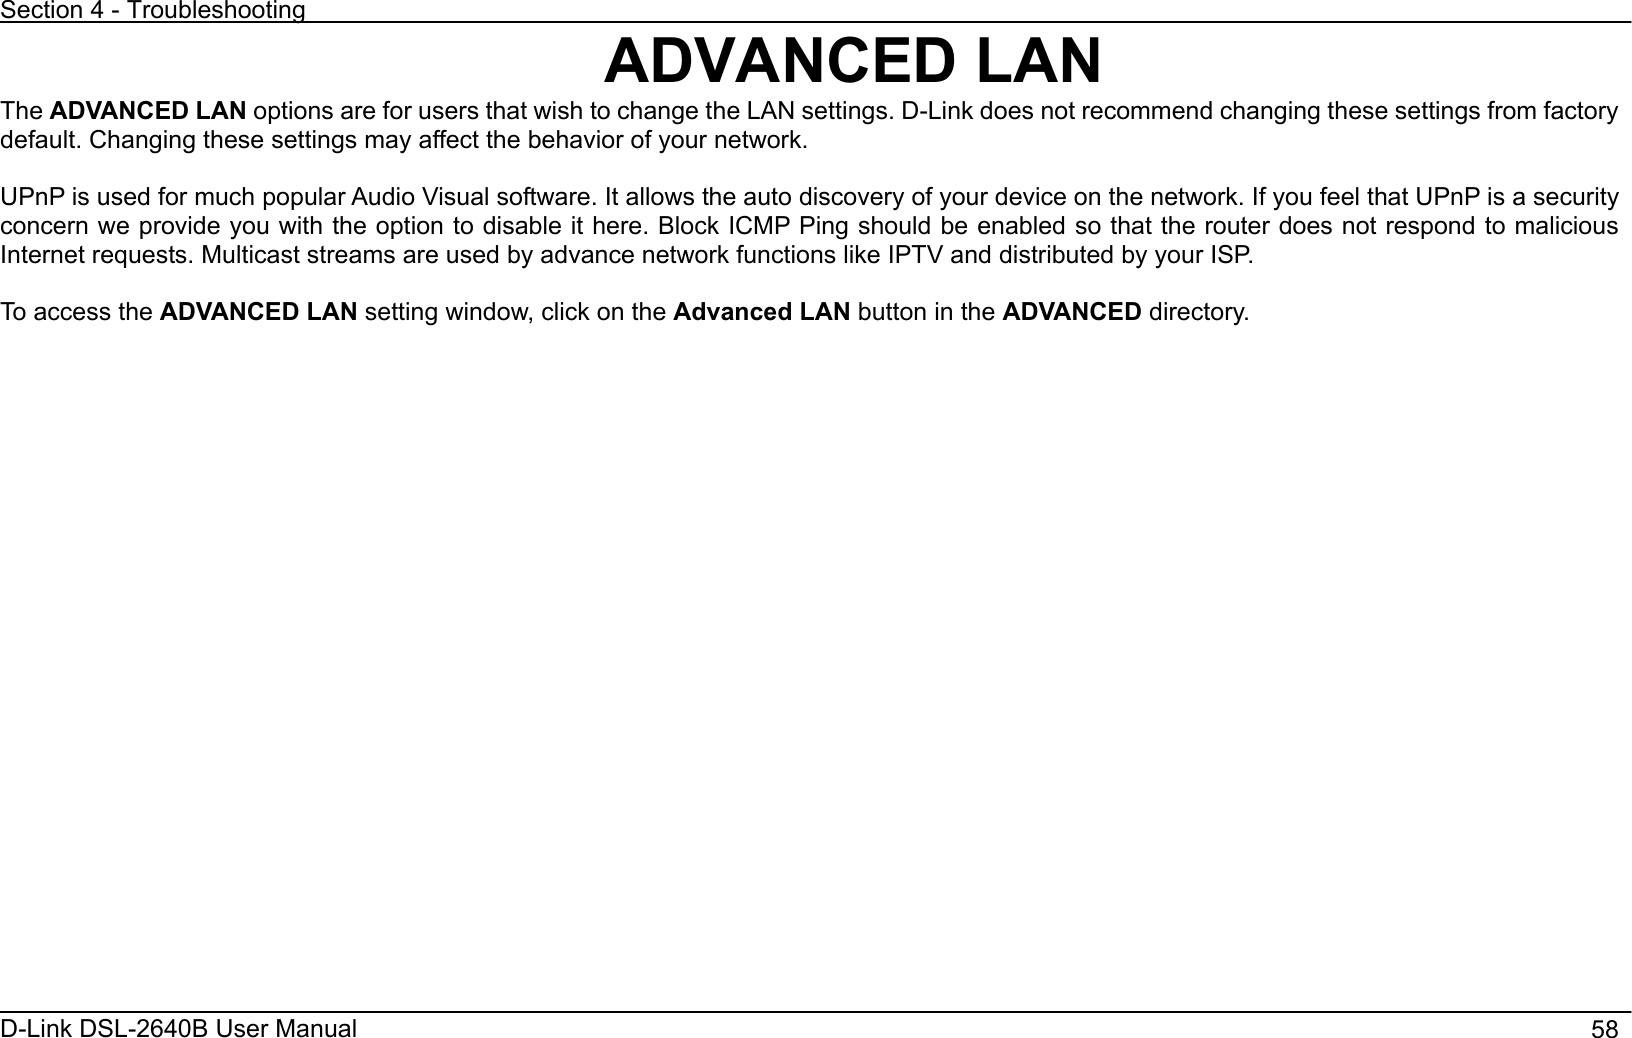 Section 4 - Troubleshooting D-Link DSL-2640B User Manual                                       58ADVANCED LAN The ADVANCED LAN options are for users that wish to change the LAN settings. D-Link does not recommend changing these settings from factory default. Changing these settings may affect the behavior of your network. UPnP is used for much popular Audio Visual software. It allows the auto discovery of your device on the network. If you feel that UPnP is a security concern we provide you with the option to disable it here. Block ICMP Ping should be enabled so that the router does not respond to malicious Internet requests. Multicast streams are used by advance network functions like IPTV and distributed by your ISP. To access the ADVANCED LAN setting window, click on the Advanced LAN button in the ADVANCED directory. 